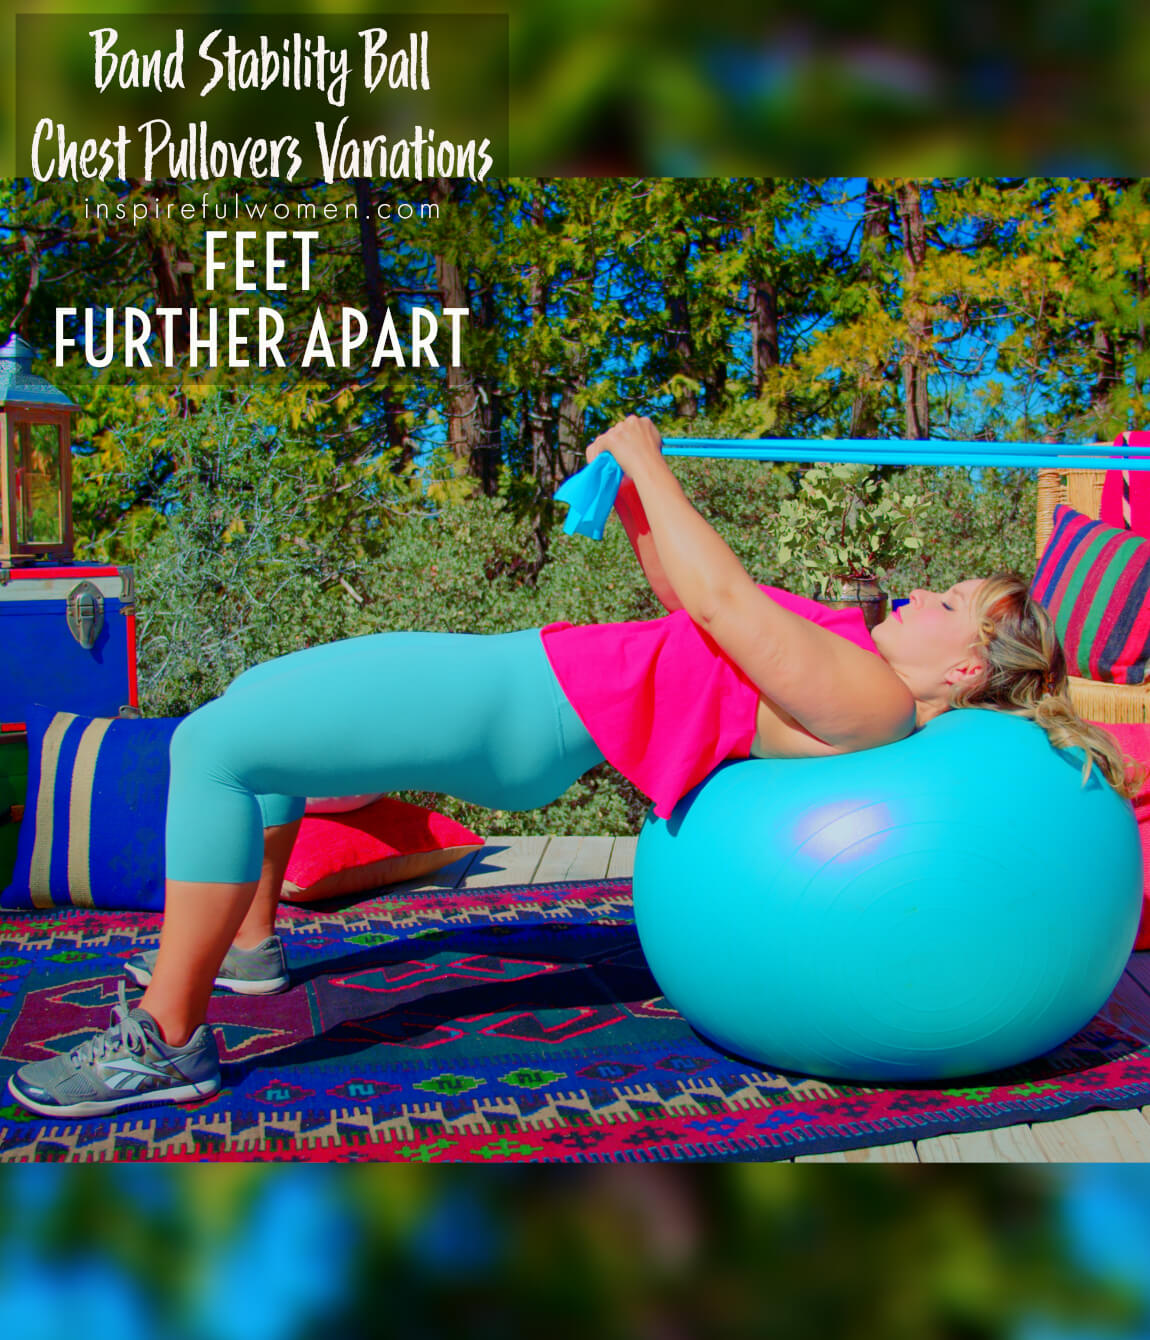 feet-further-apart-stability-ball-band-chest-pullover-variations